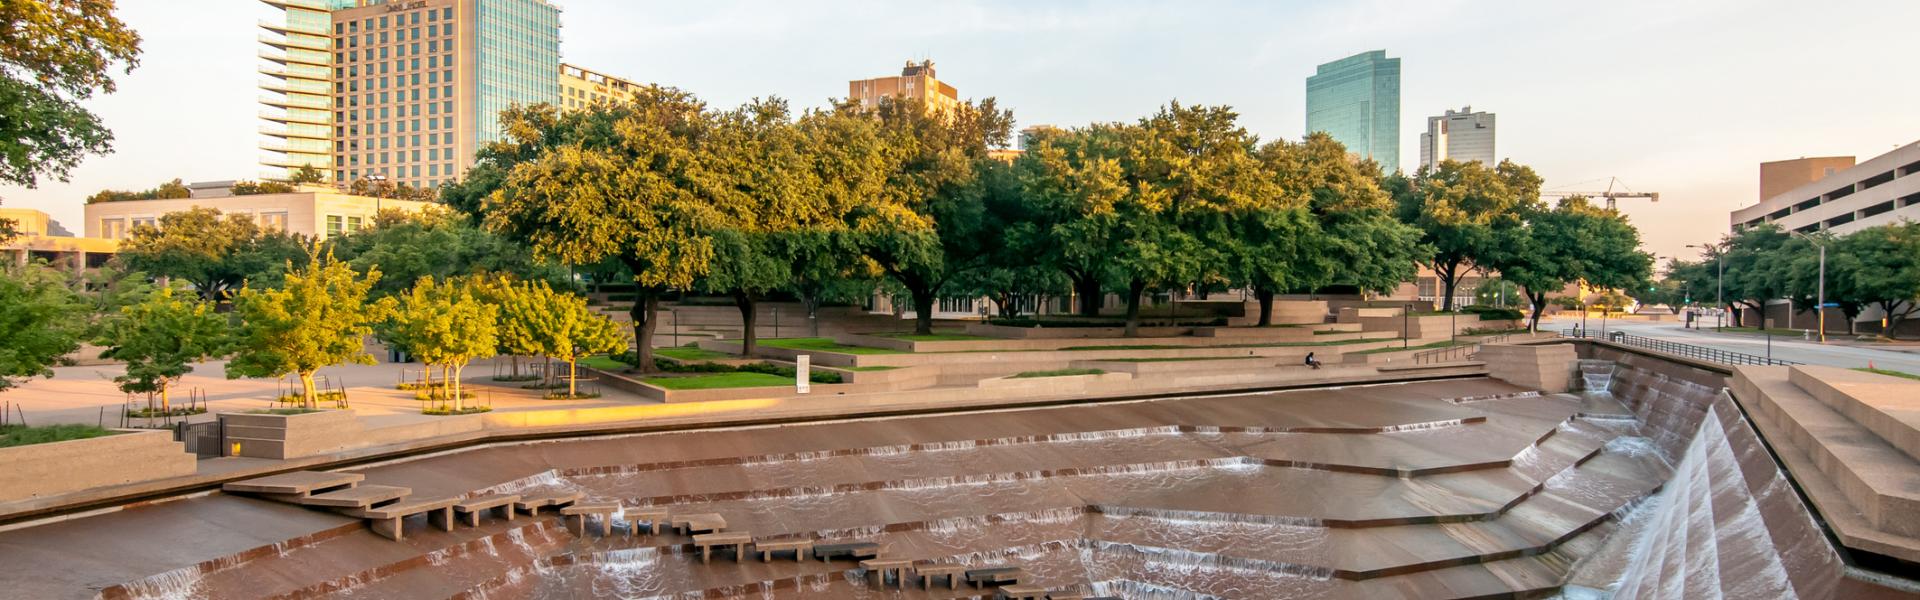 Holiday lettings & accommodation in Fort Worth - HomeToGo